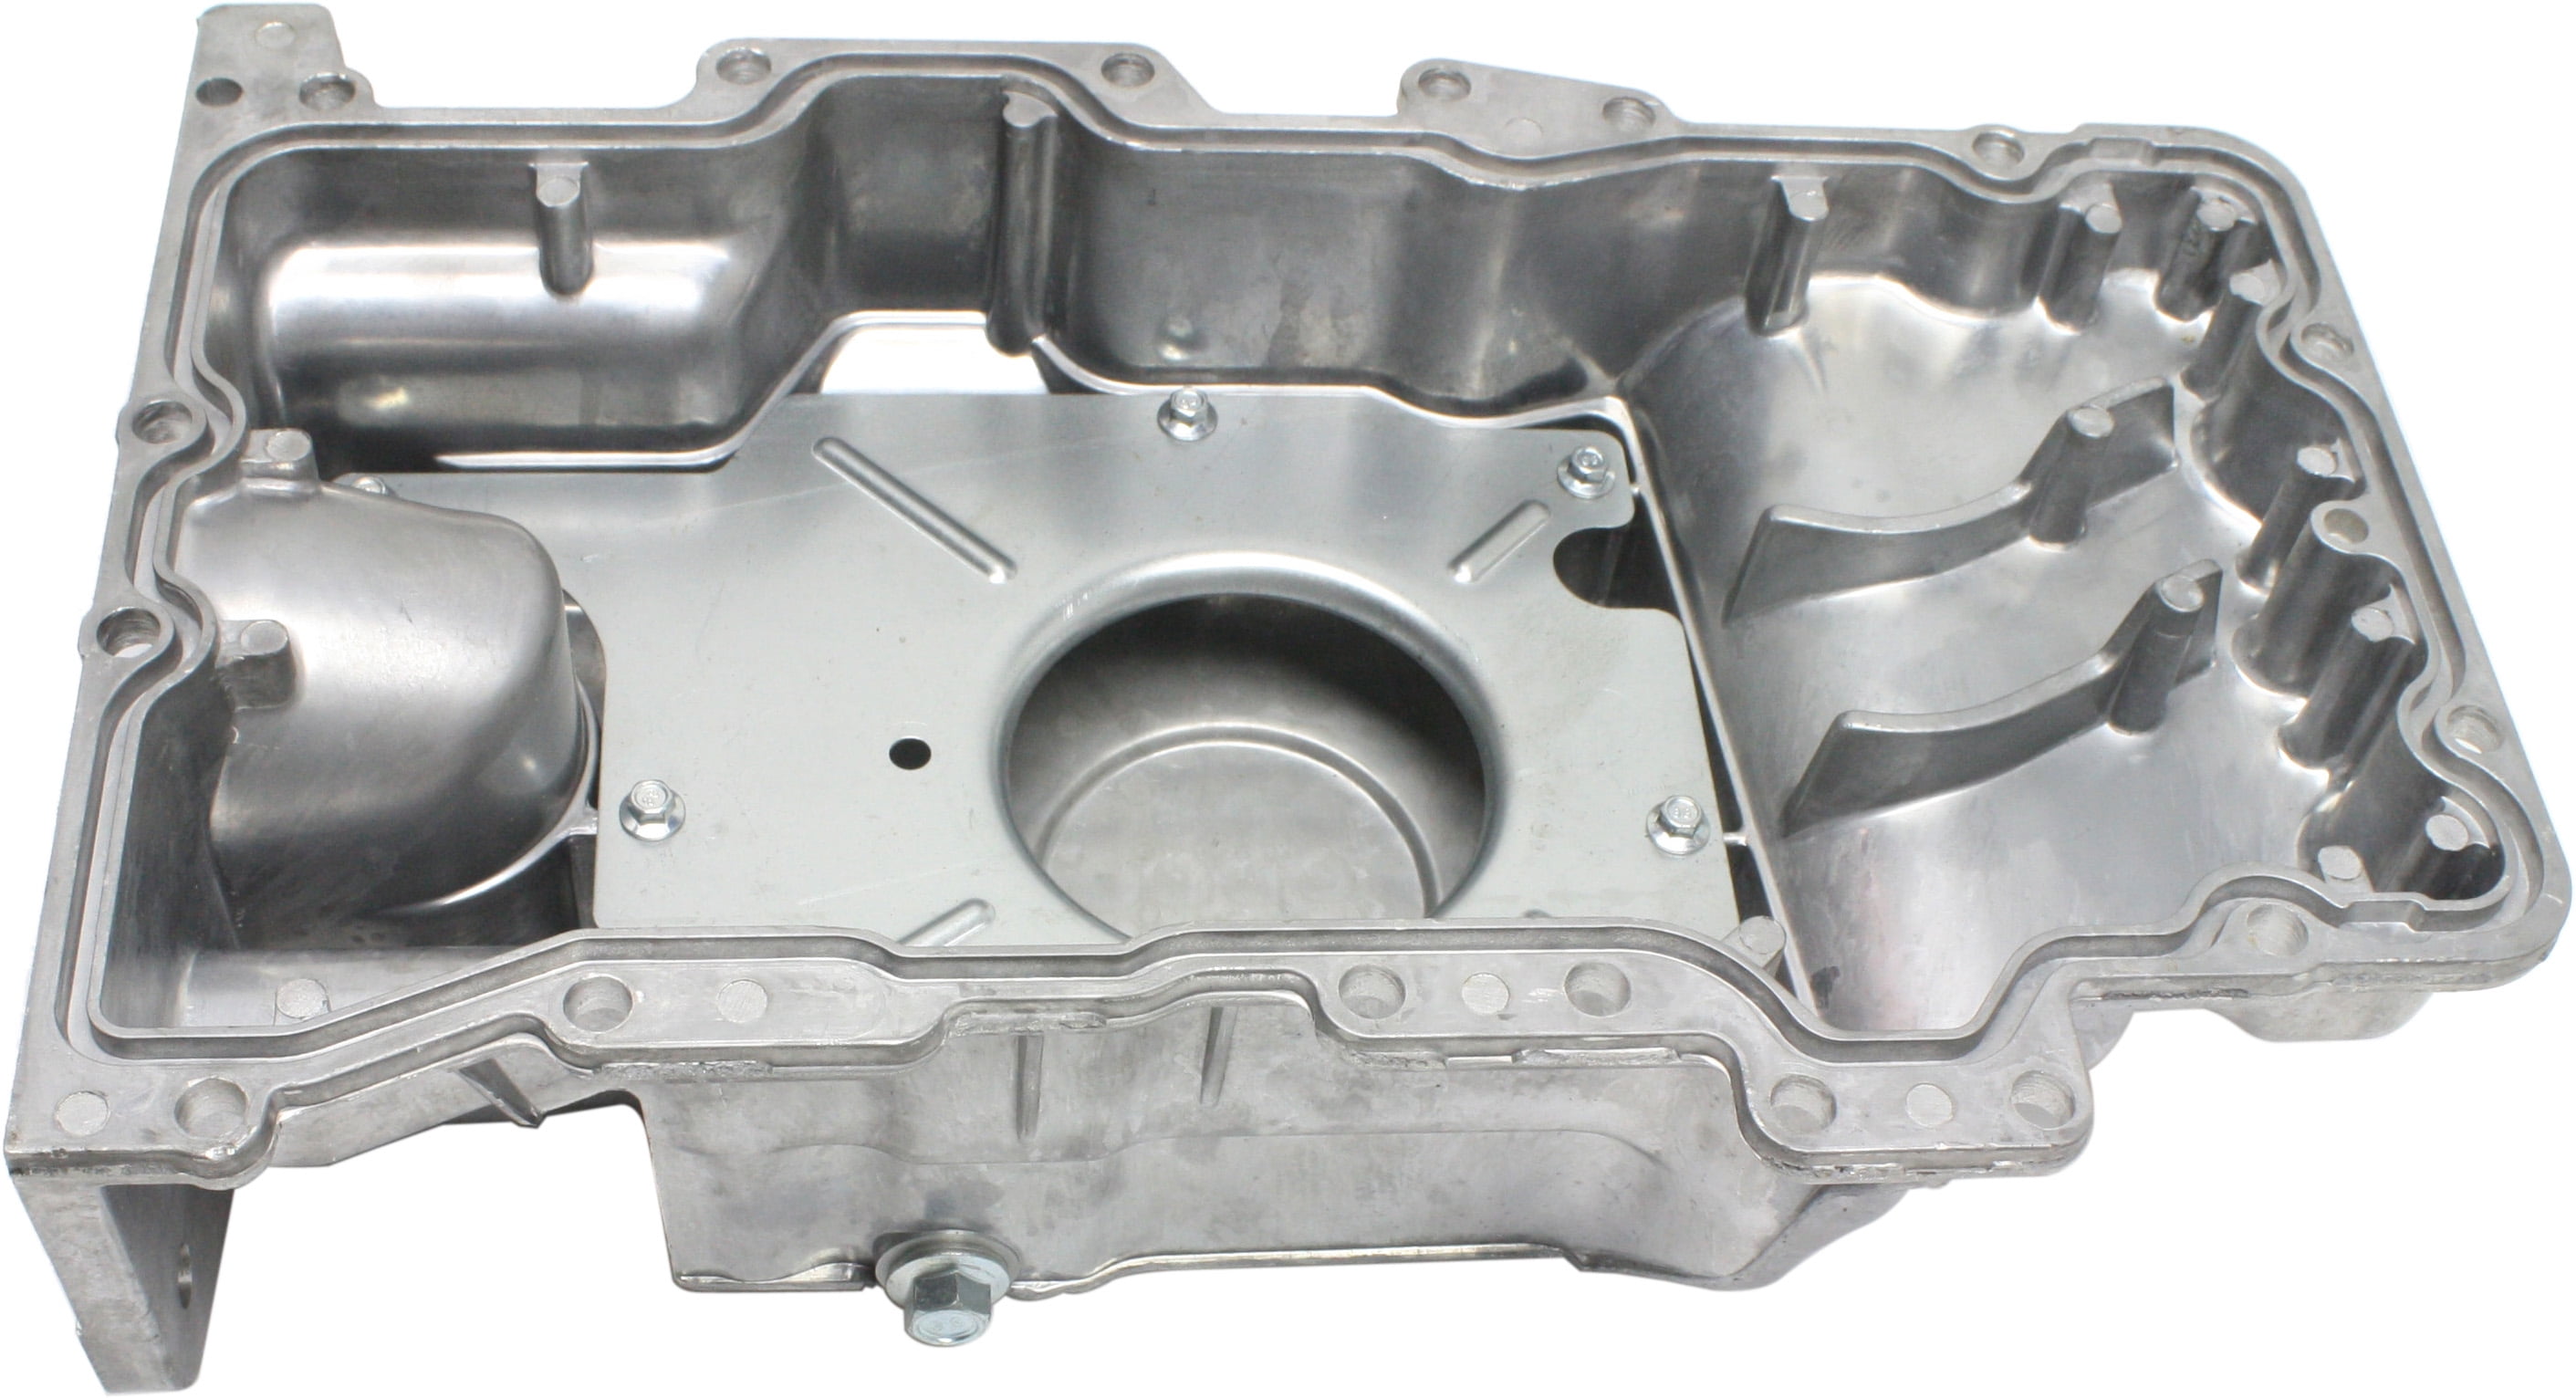 For Ford Five Hundred/Freestyle Oil Pan 2005 2006 2007 Center Sump Location 3.0L Engine CAPAcity Aluminum Material 6 qts 6 Cyl 